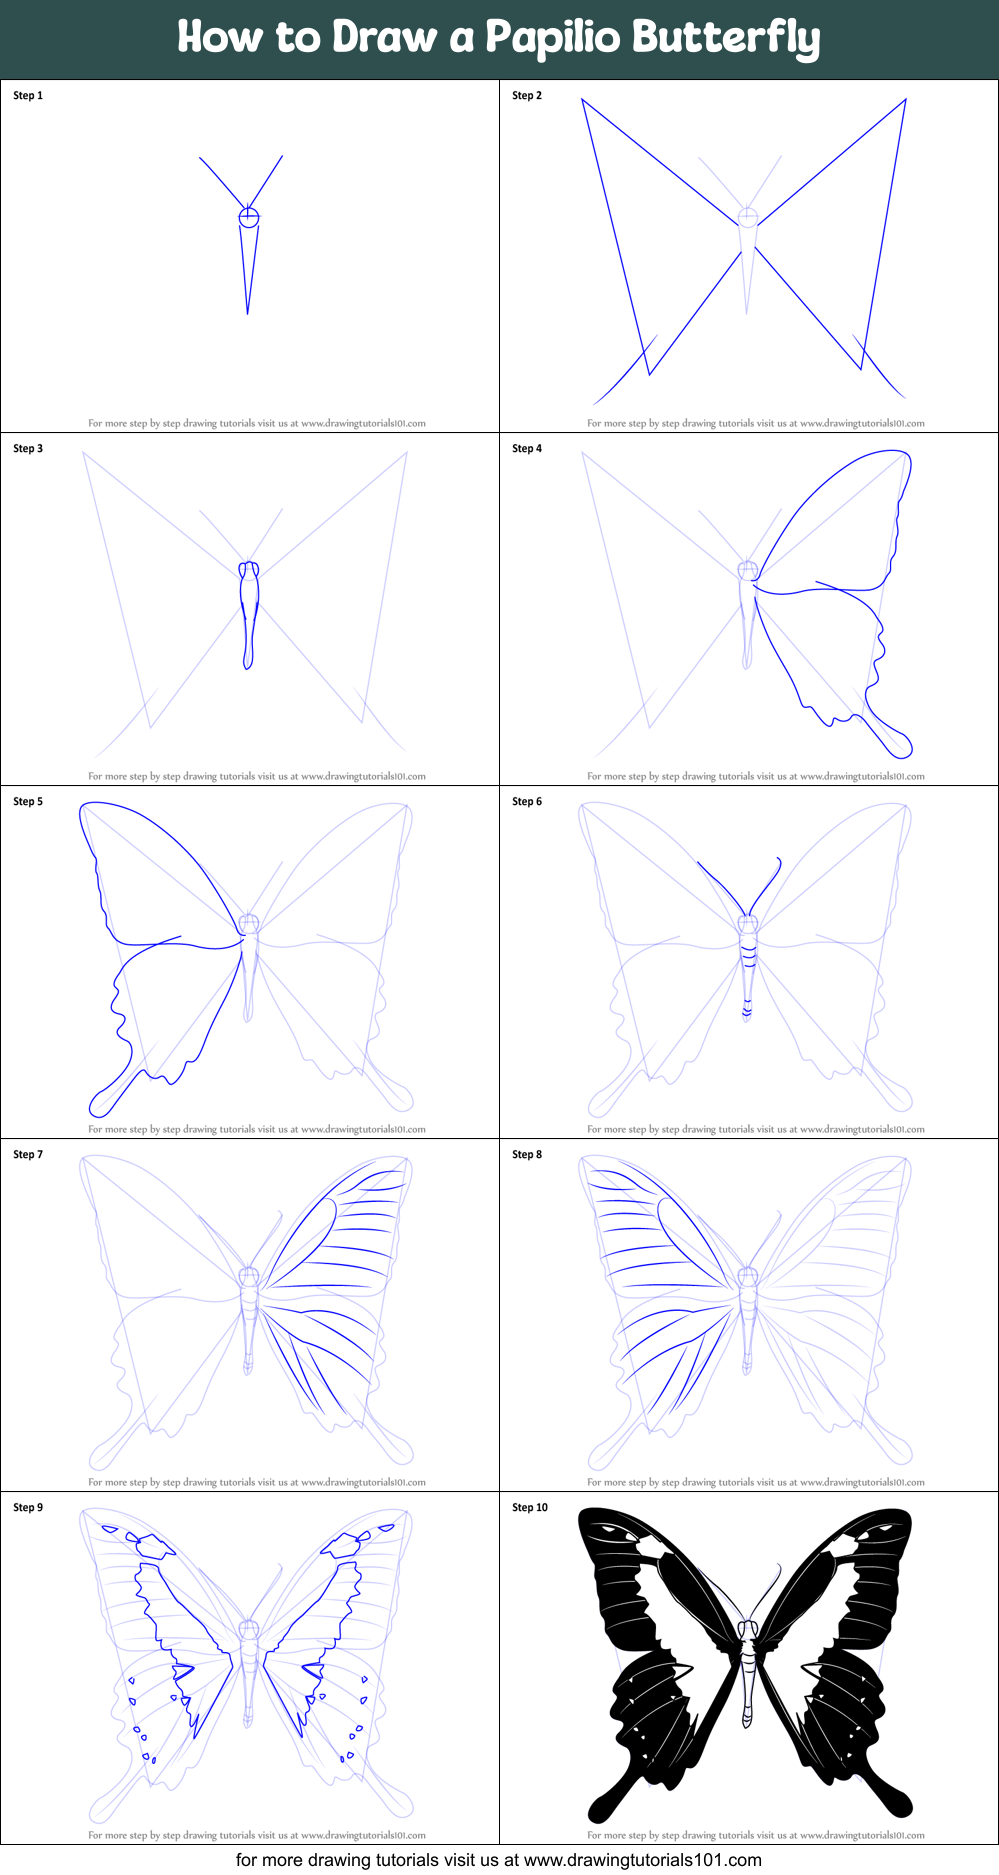 How to Draw a Papilio Butterfly printable step by step drawing sheet